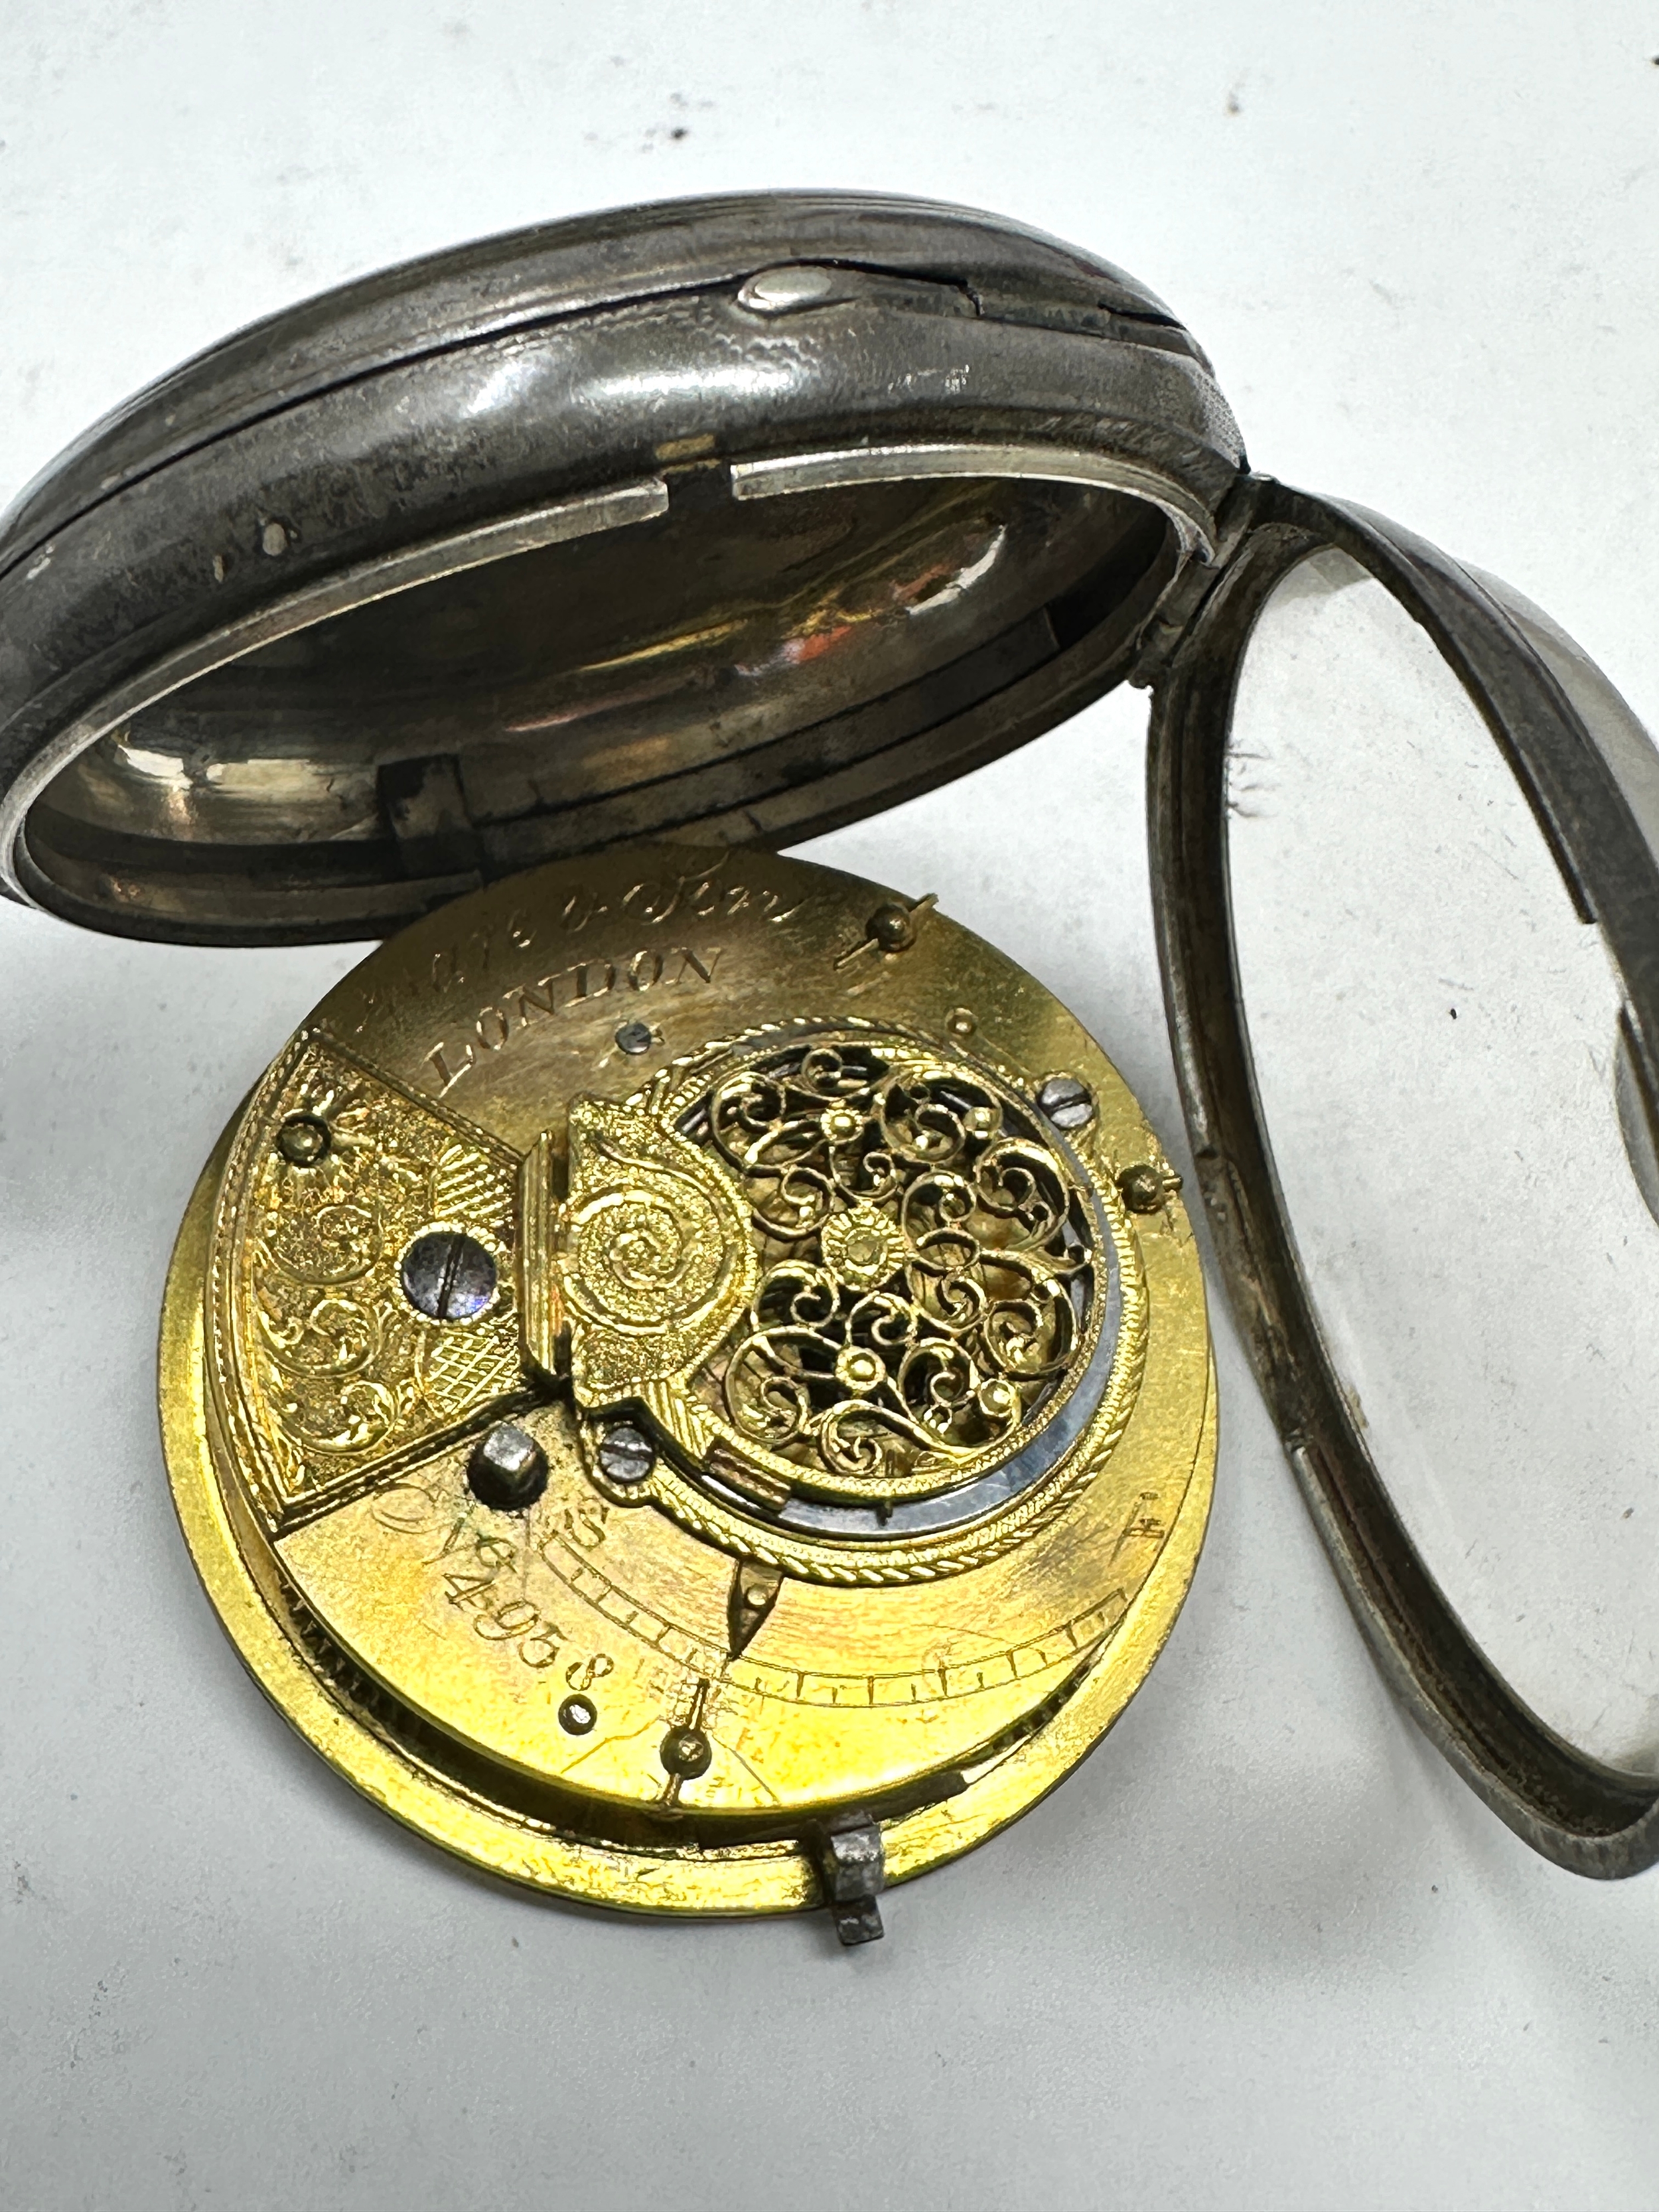 Antique silver open face fusee verge pocket watch ware & son London movement the watch is not - Image 4 of 5